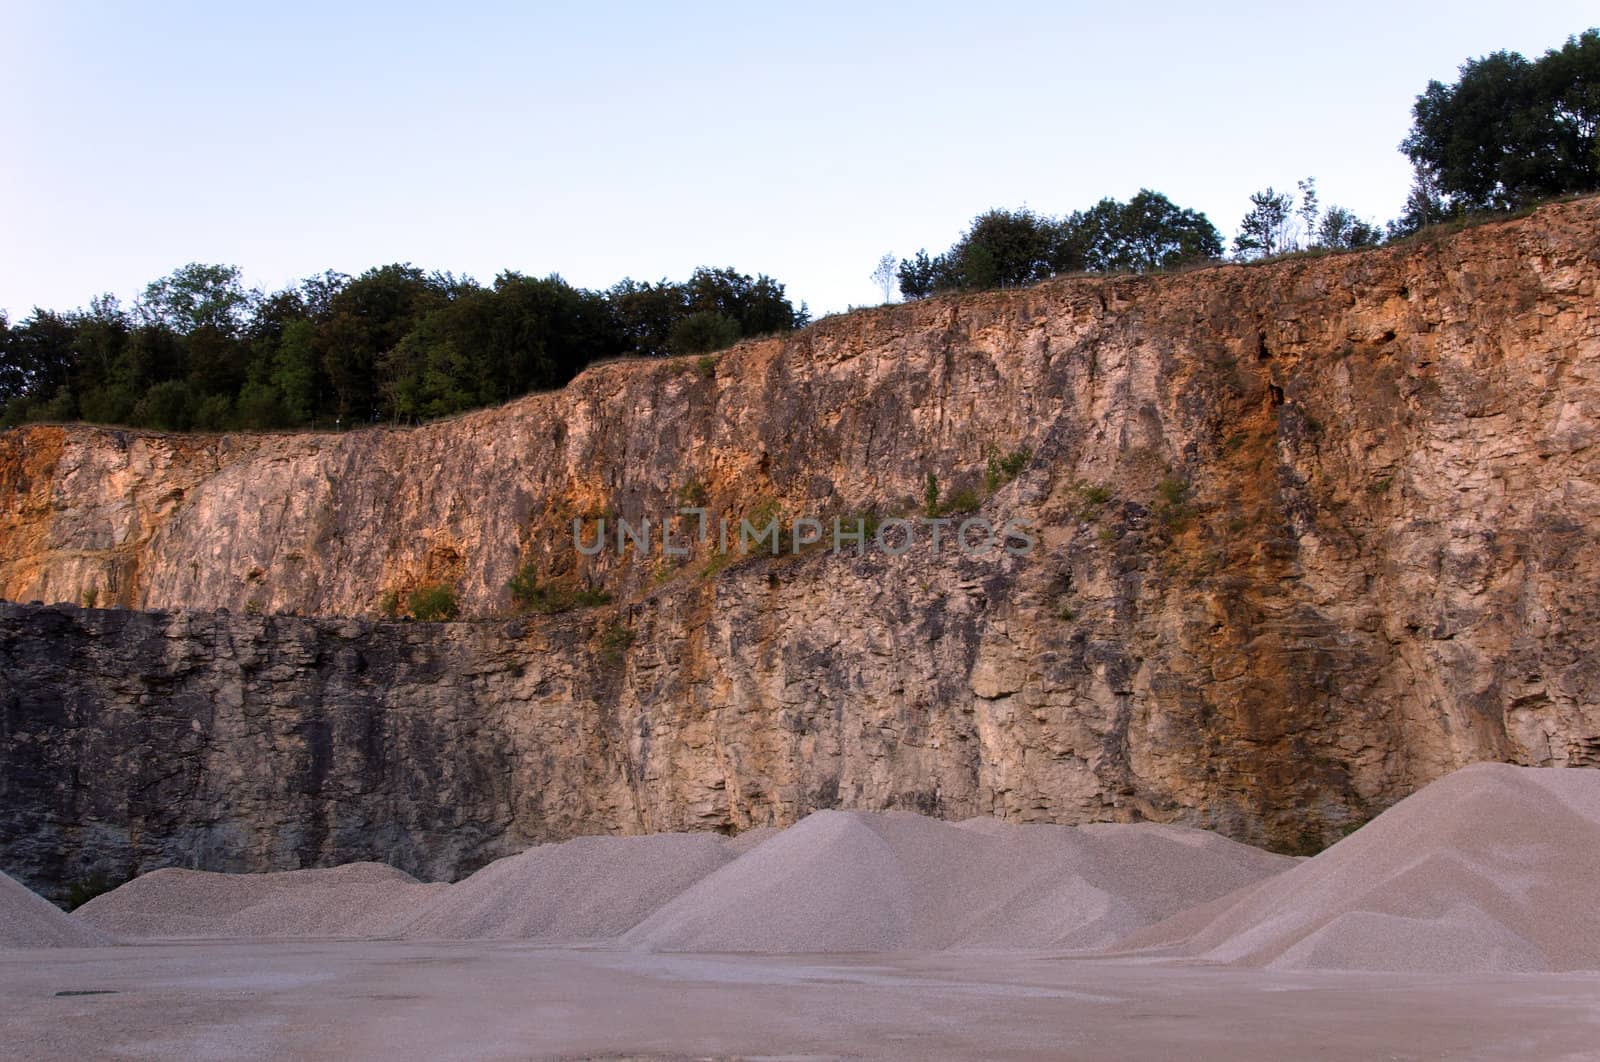 Views of a stone quarry in south western Germany